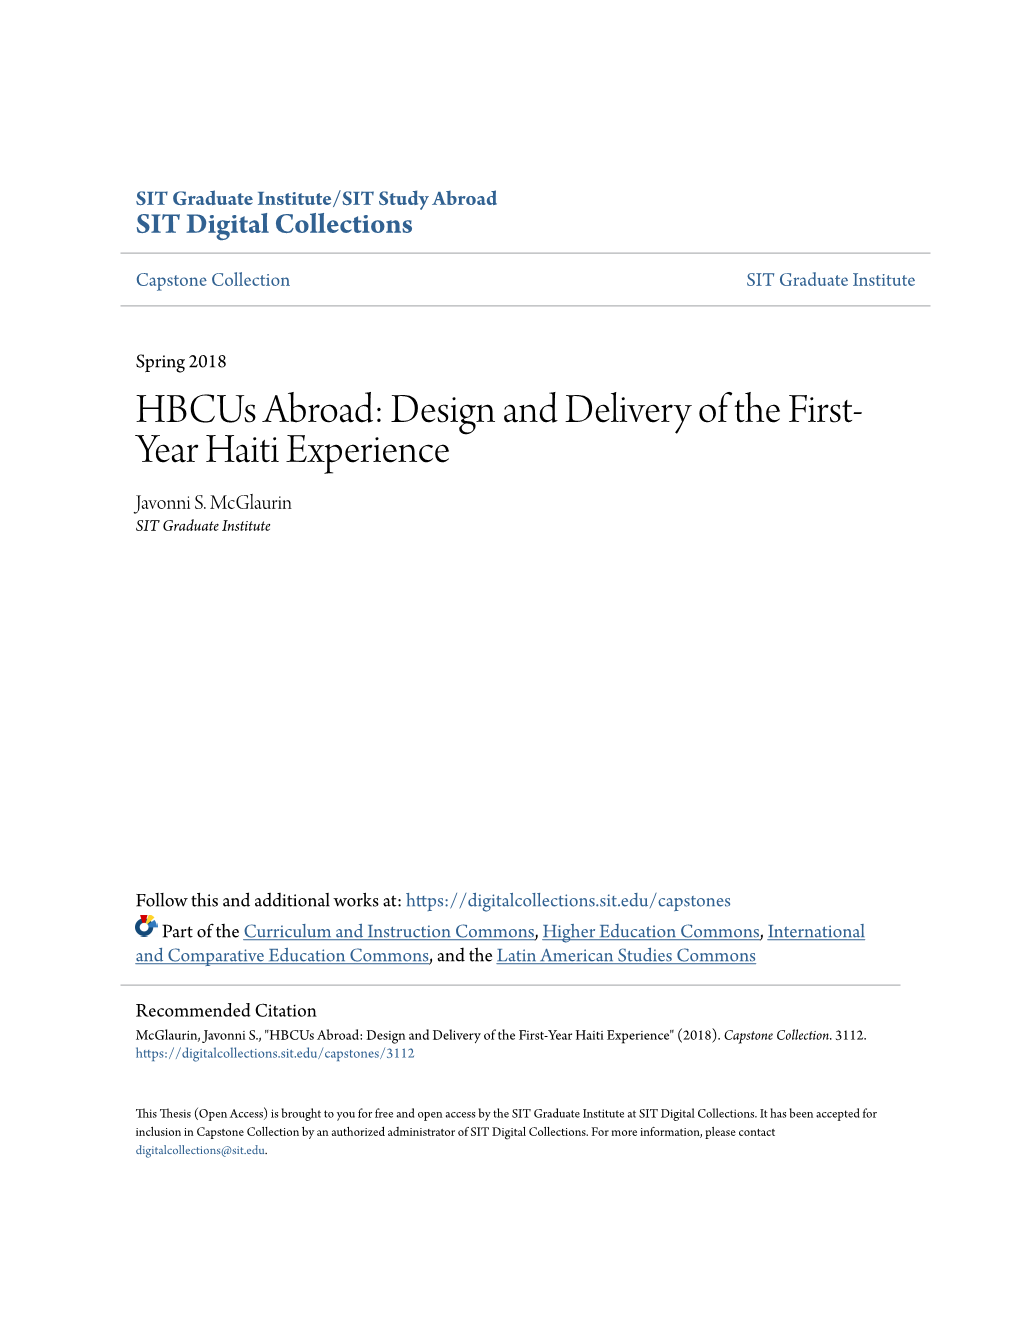 Hbcus Abroad: Design and Delivery of the First-Year Haiti Experience" (2018)